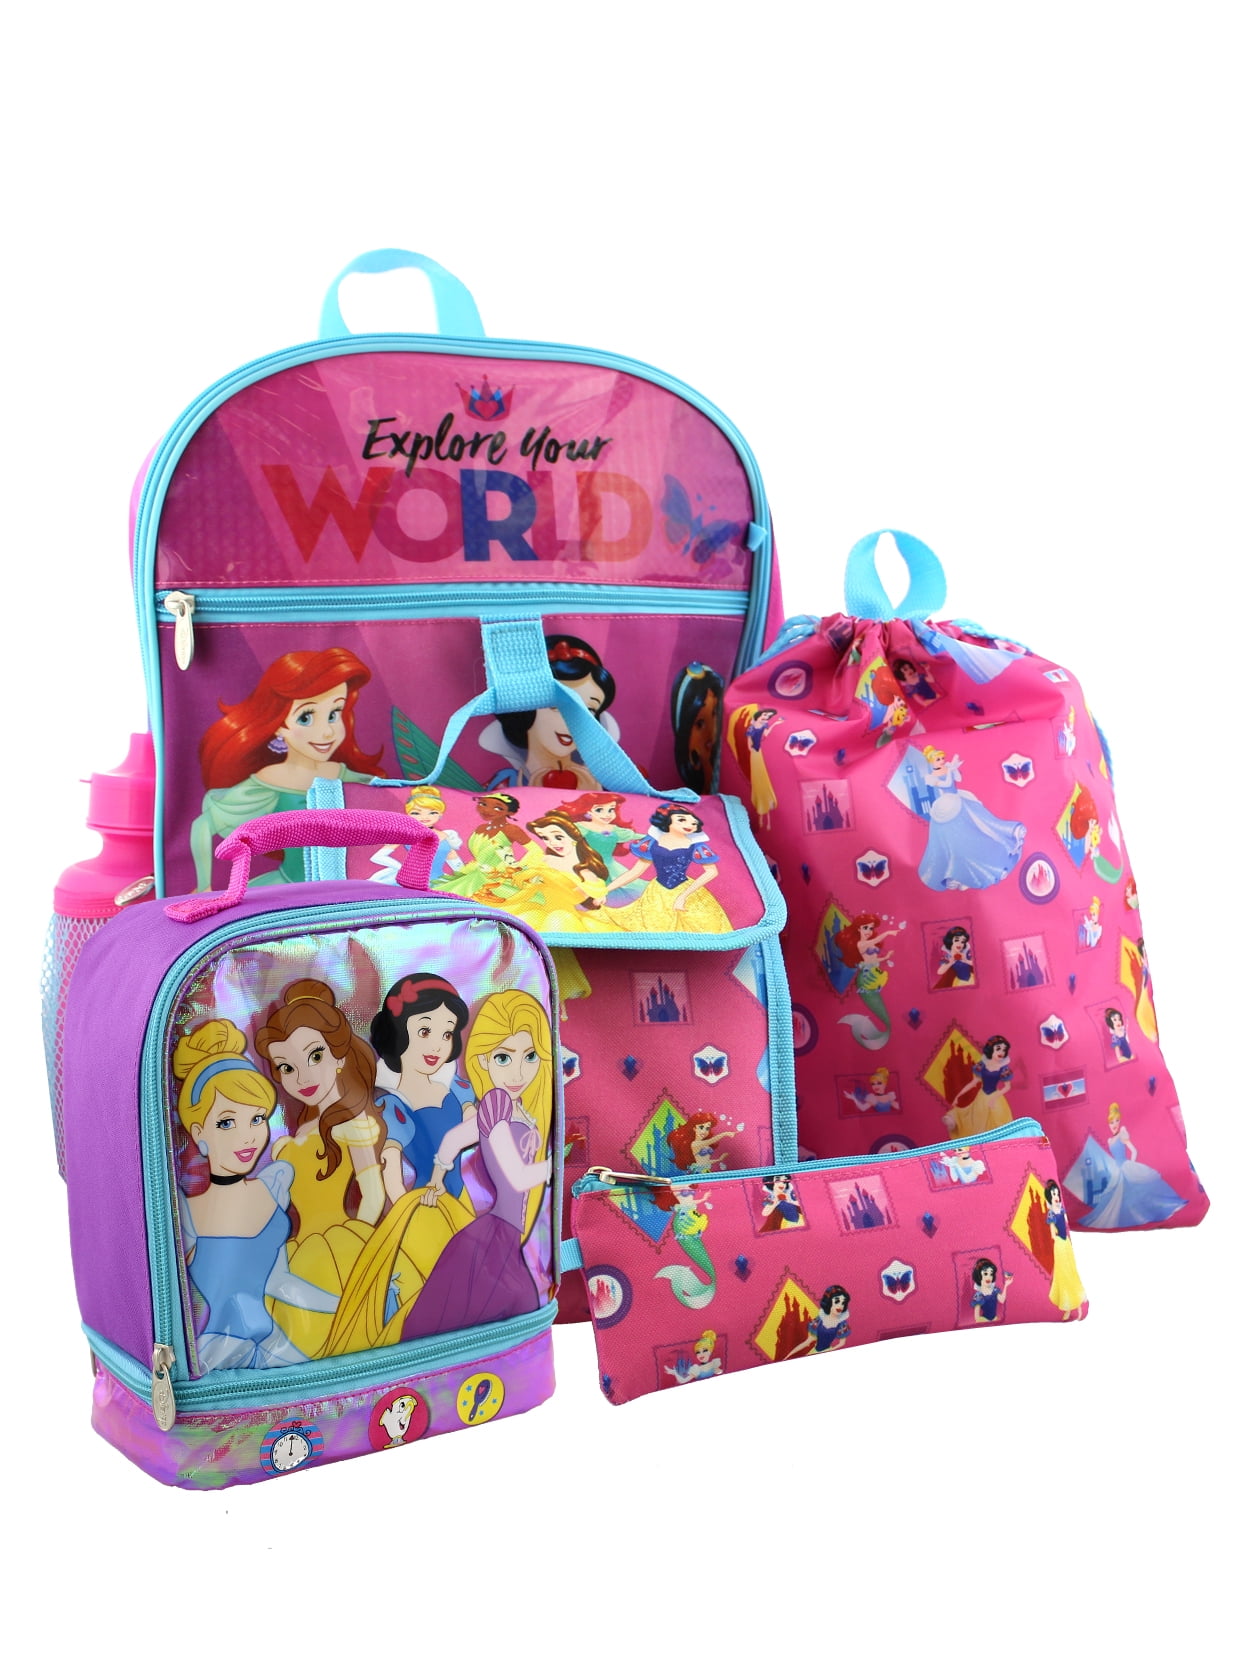 Disney Princess 6 piece Backpack and Lunch Box School Set